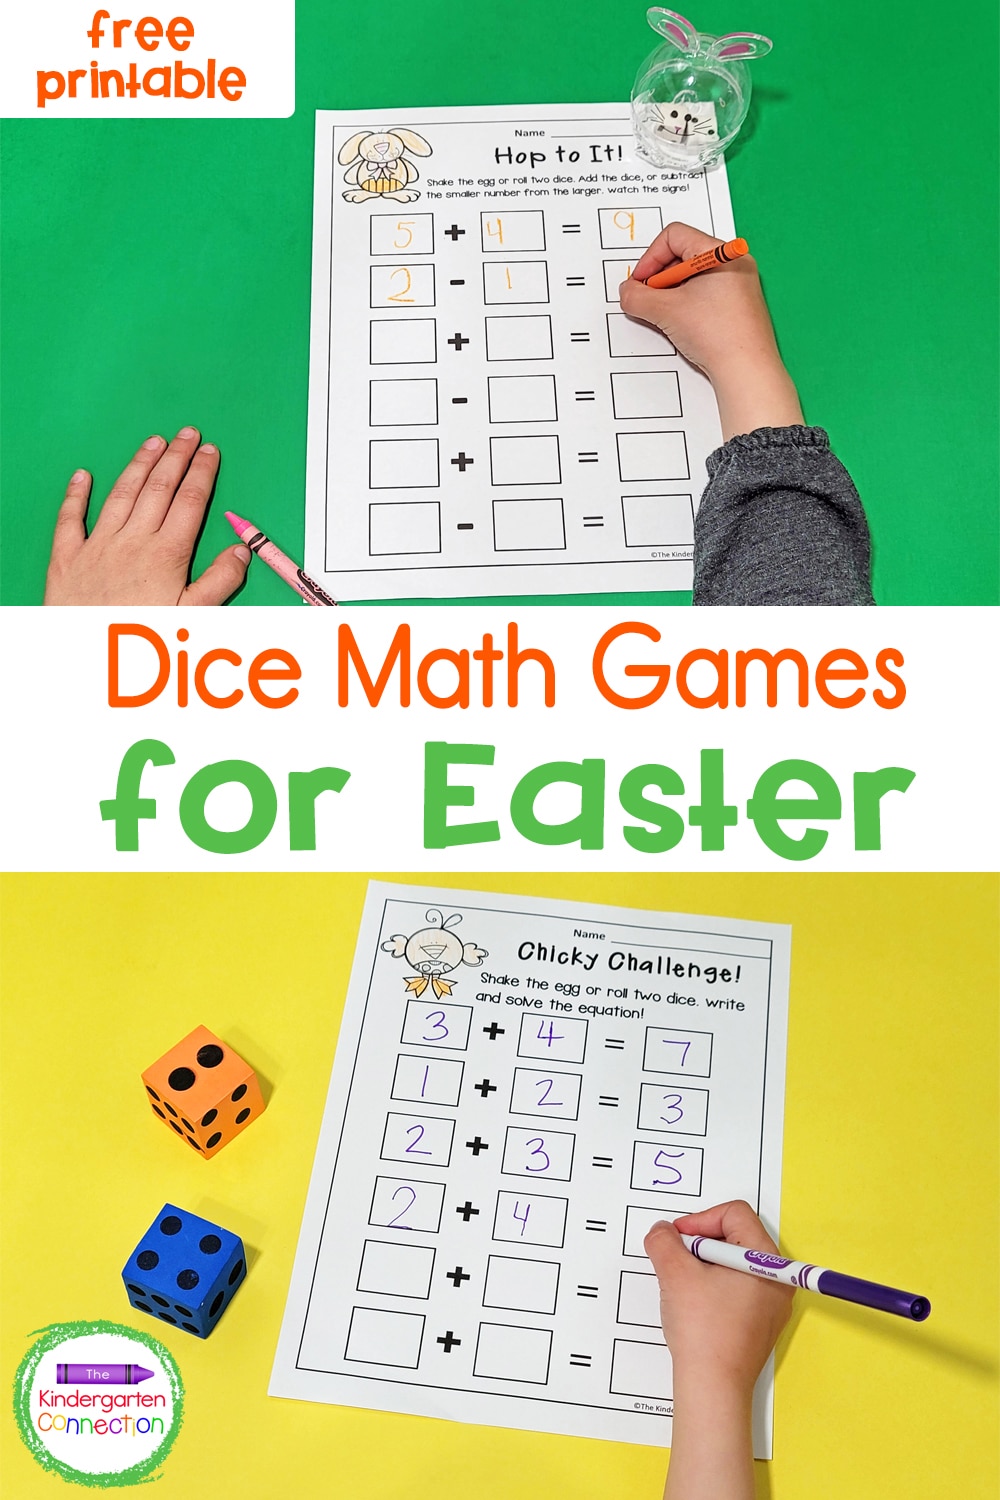 These free Dice Math Games for Easter are the perfect hands-on way to work on addition and subtraction this spring!